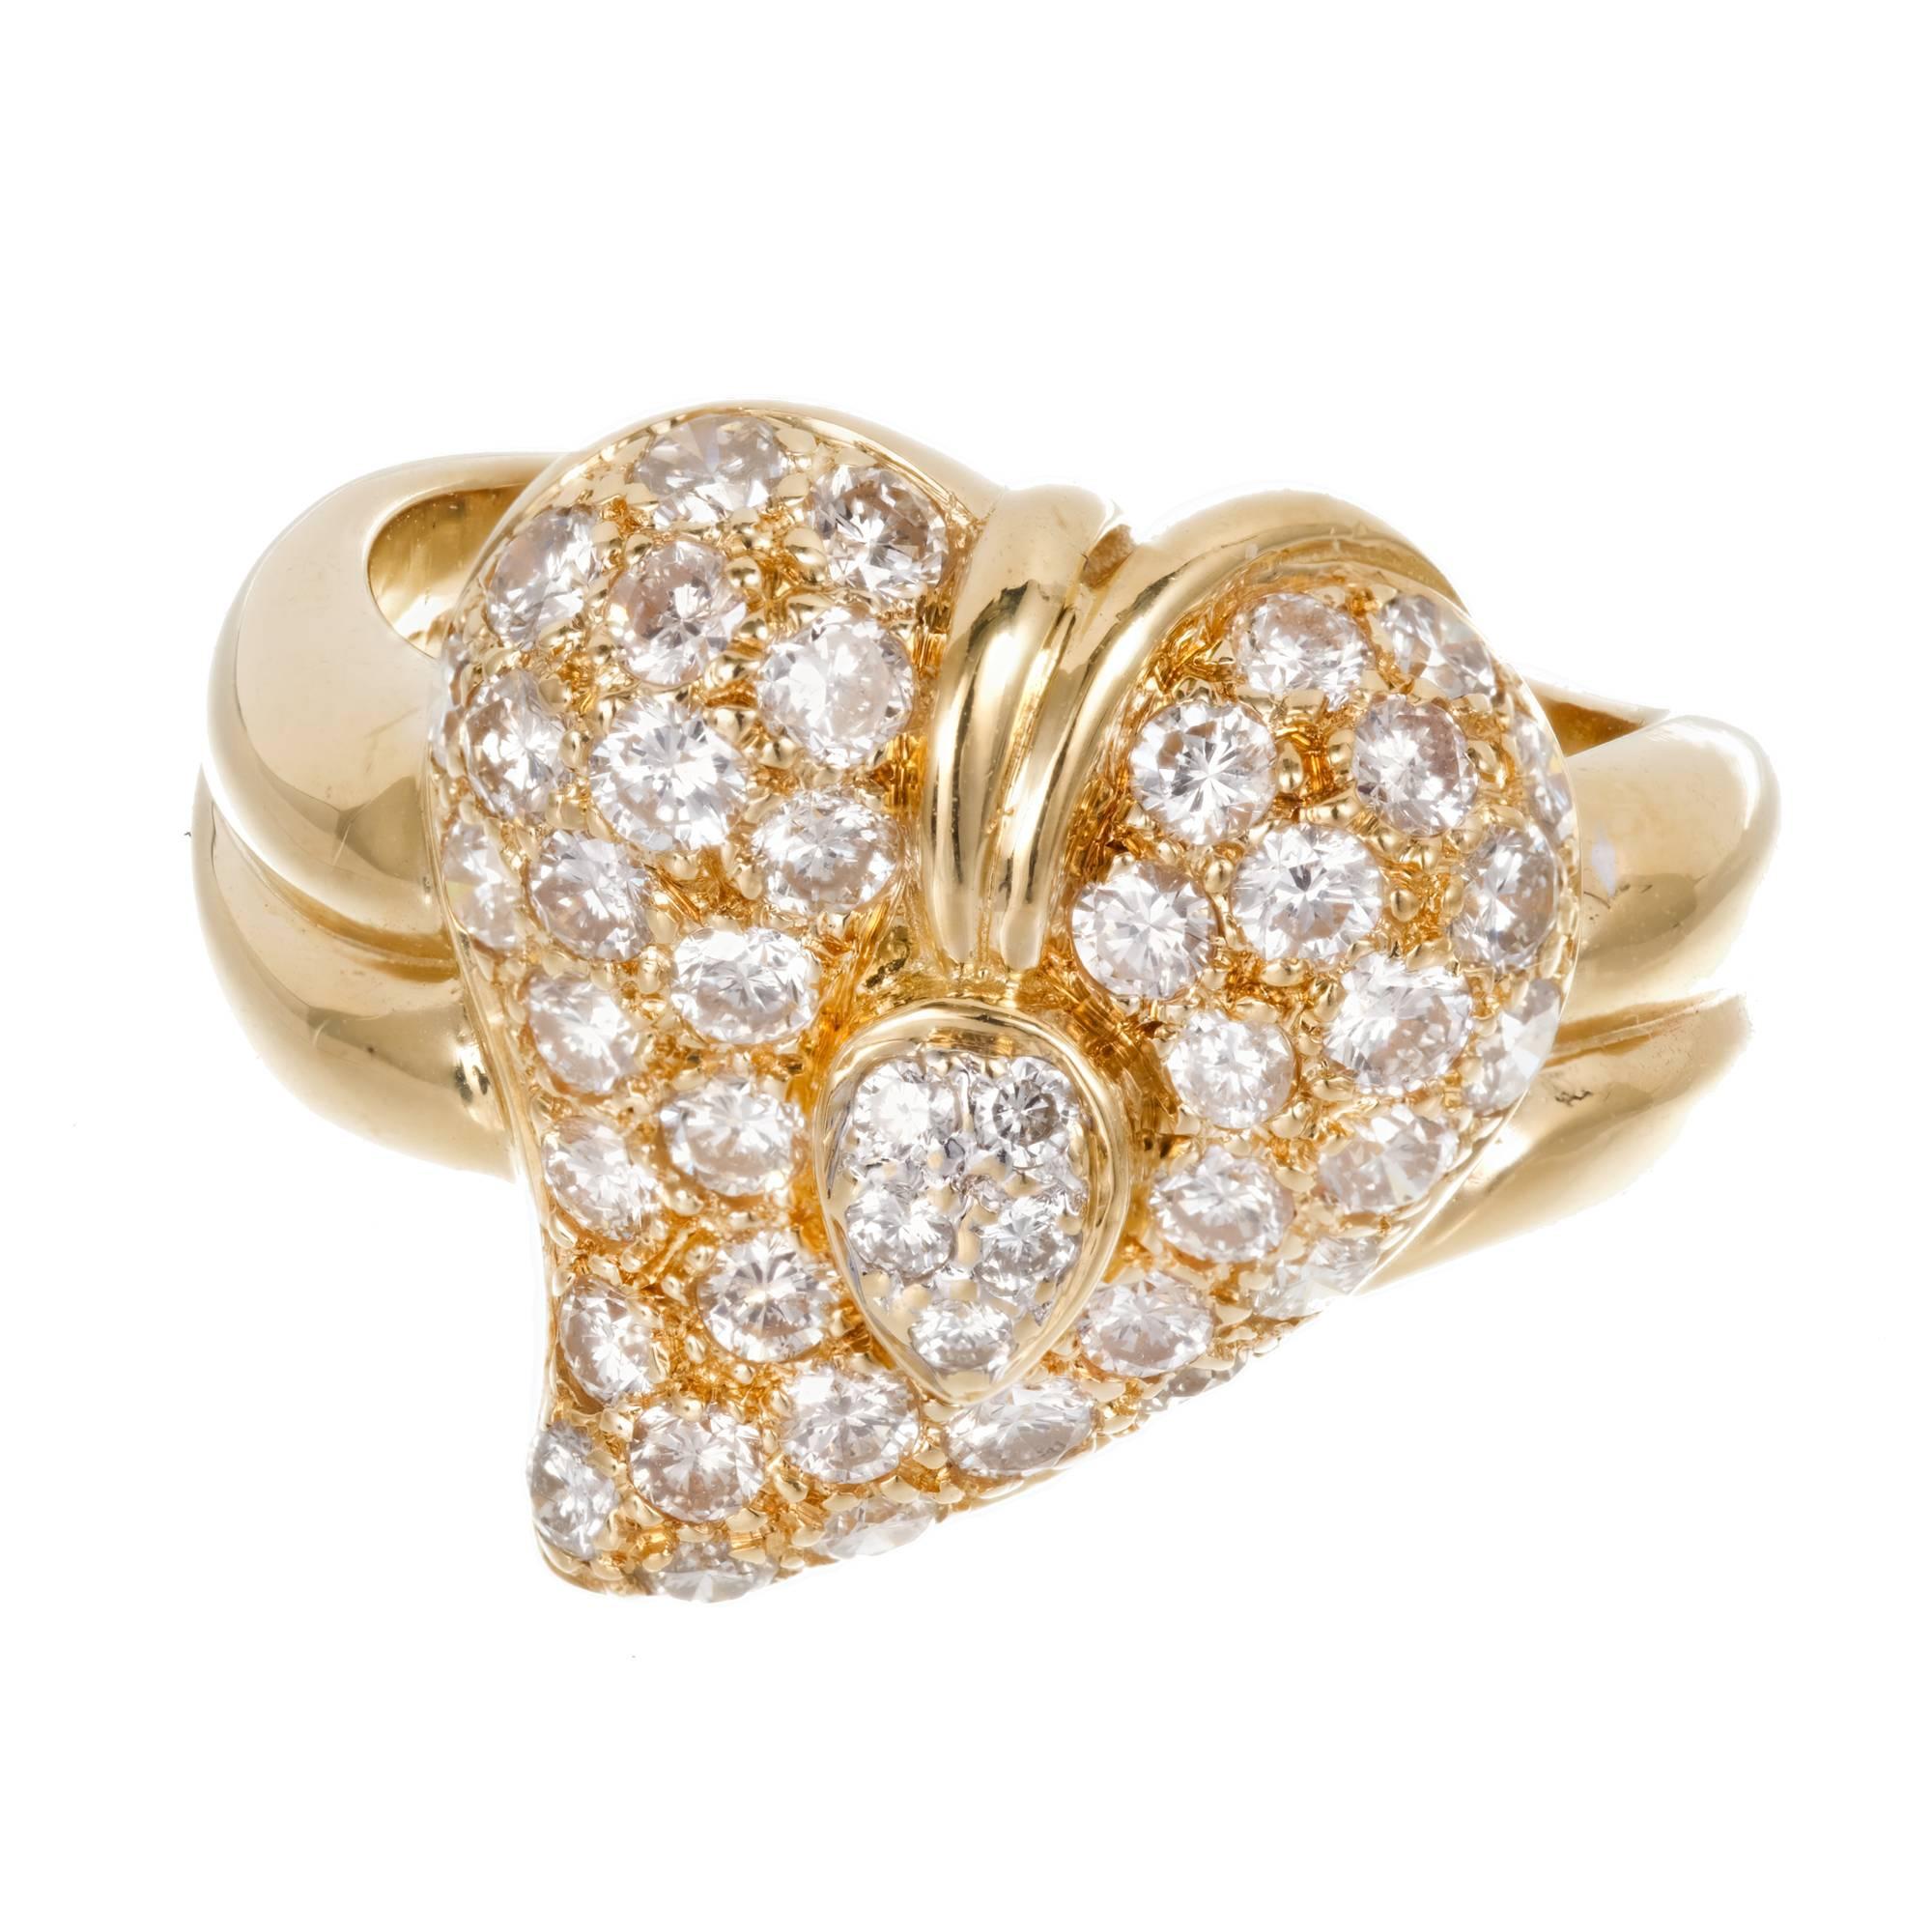 Dome Heart Diamond 18k Yellow Gold Cocktail Ring

45 round H-I VS-SI1 approximate total 1.30 carats
18k Yellow Gold

